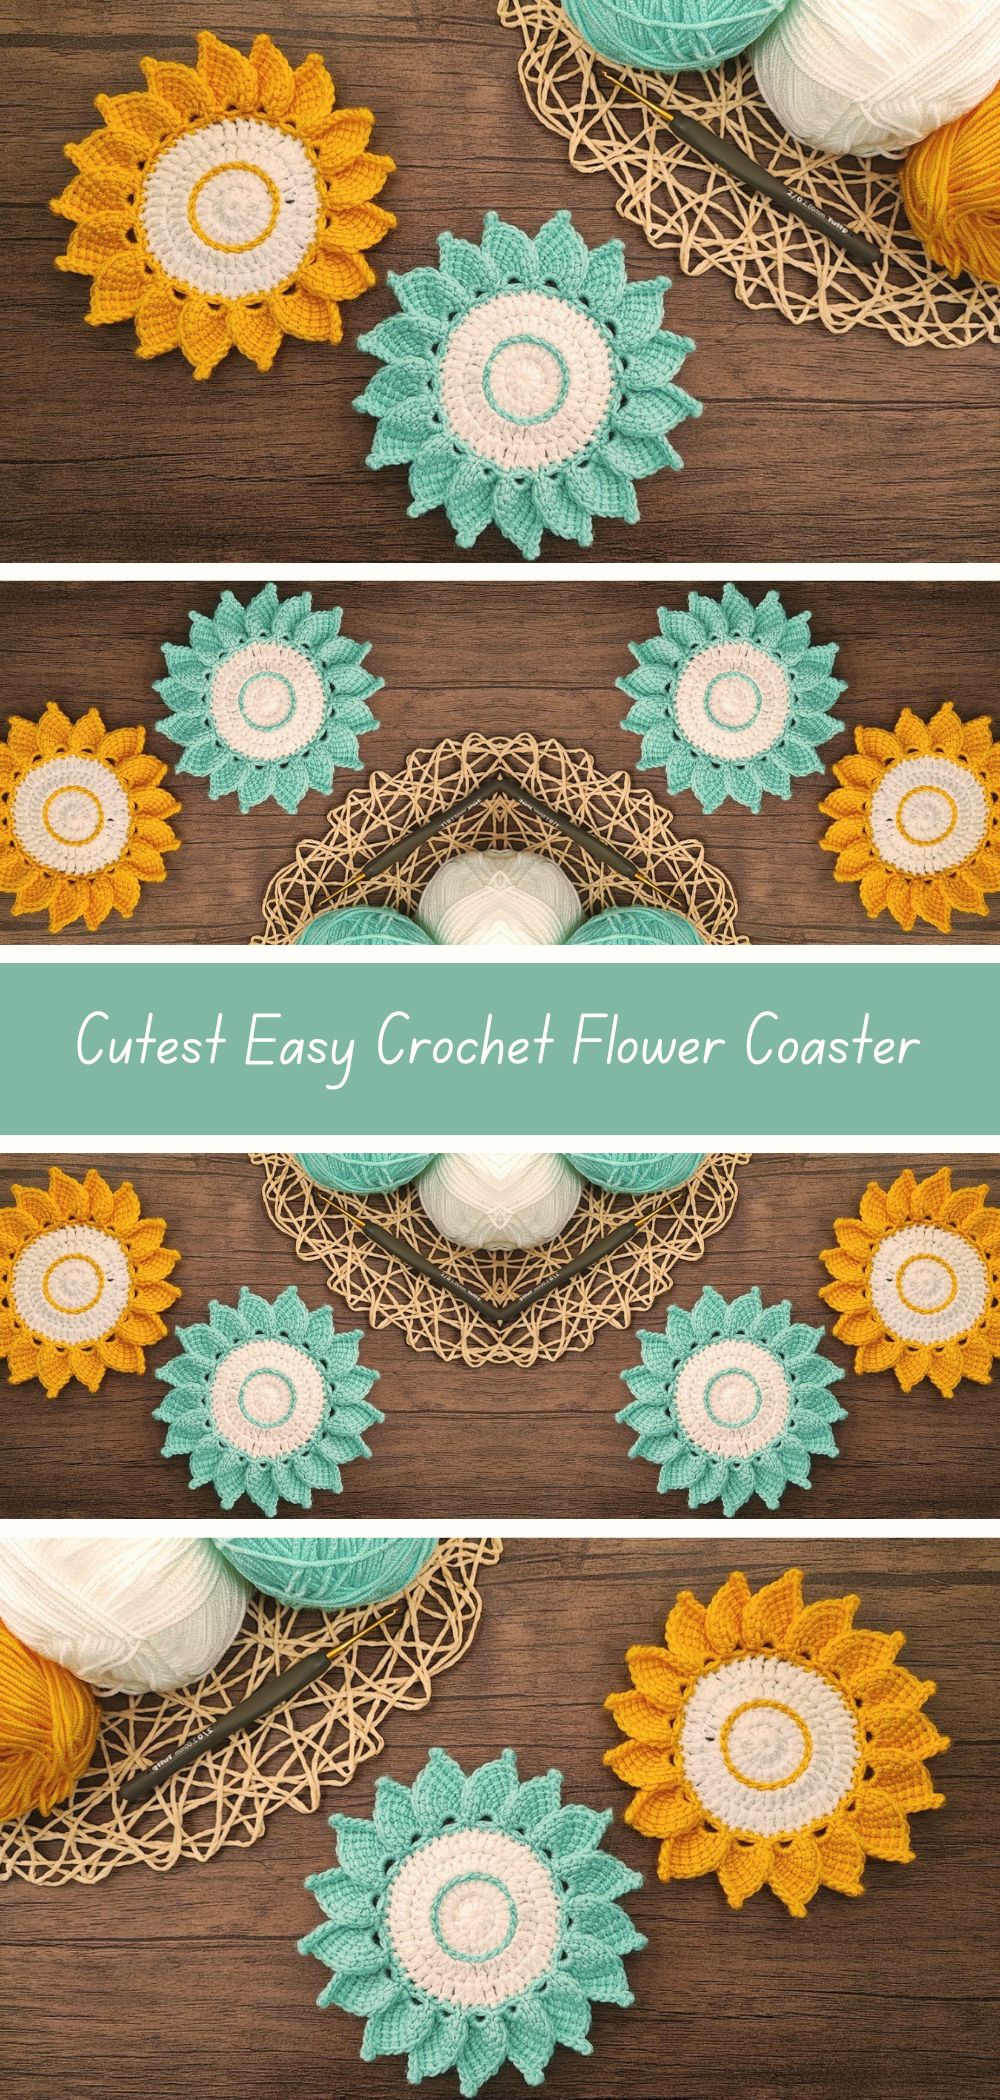 Free Pattern: Cutest Easy Crochet Coaster - Create adorable coasters with this free crochet pattern